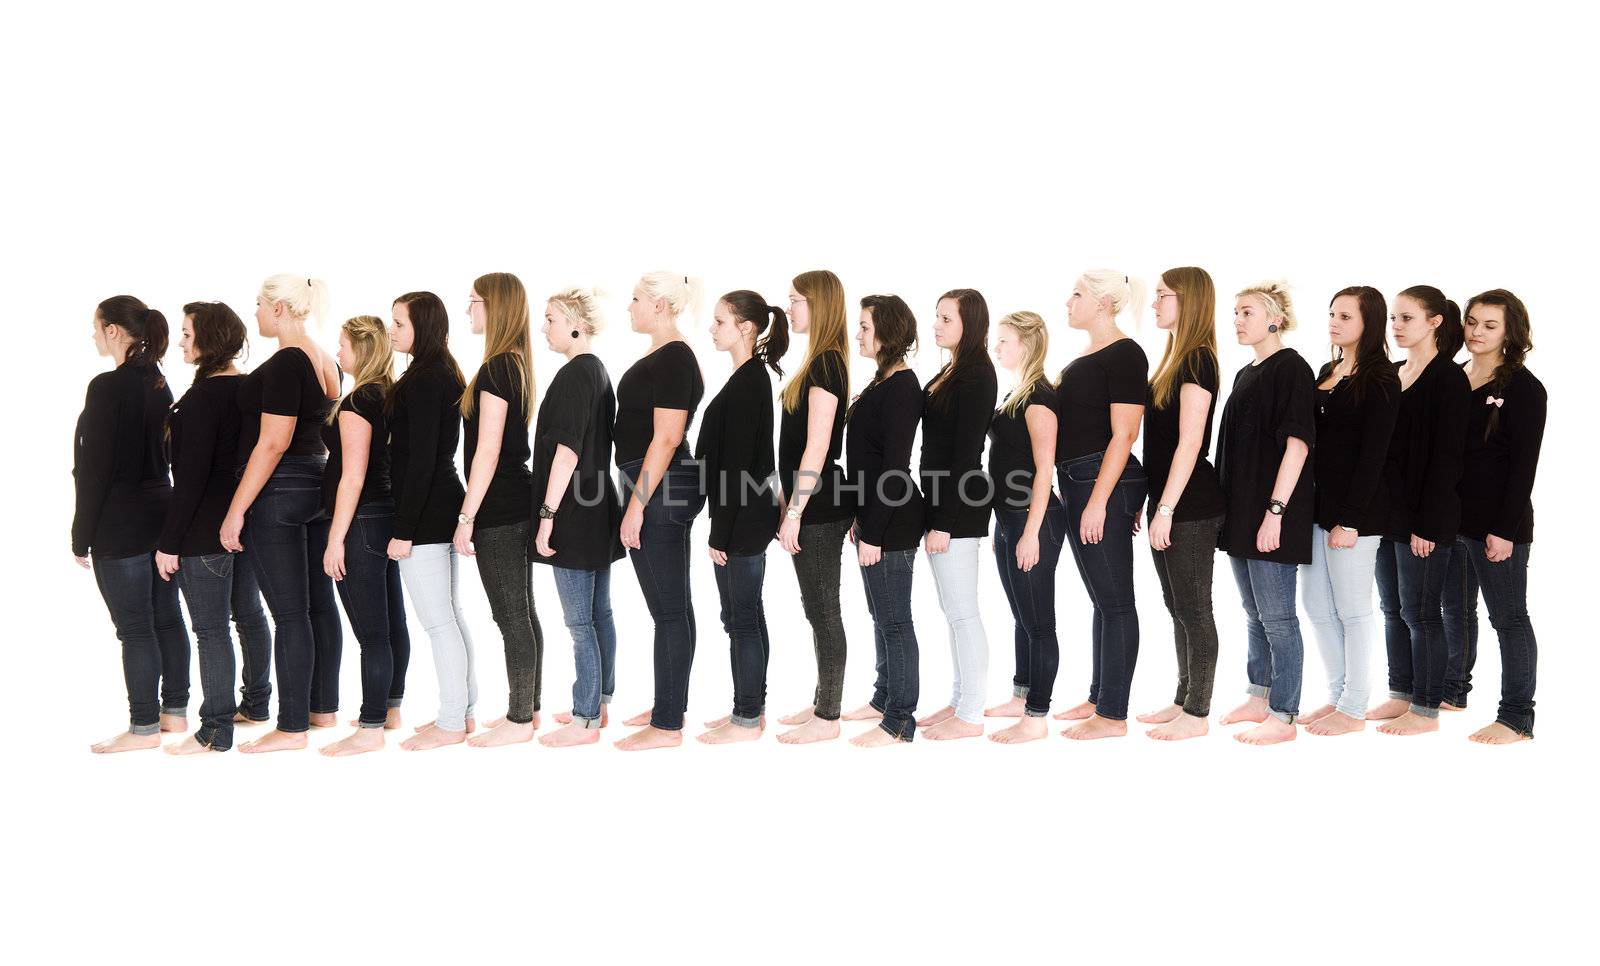 Group of women waiting in a line isolated on white background